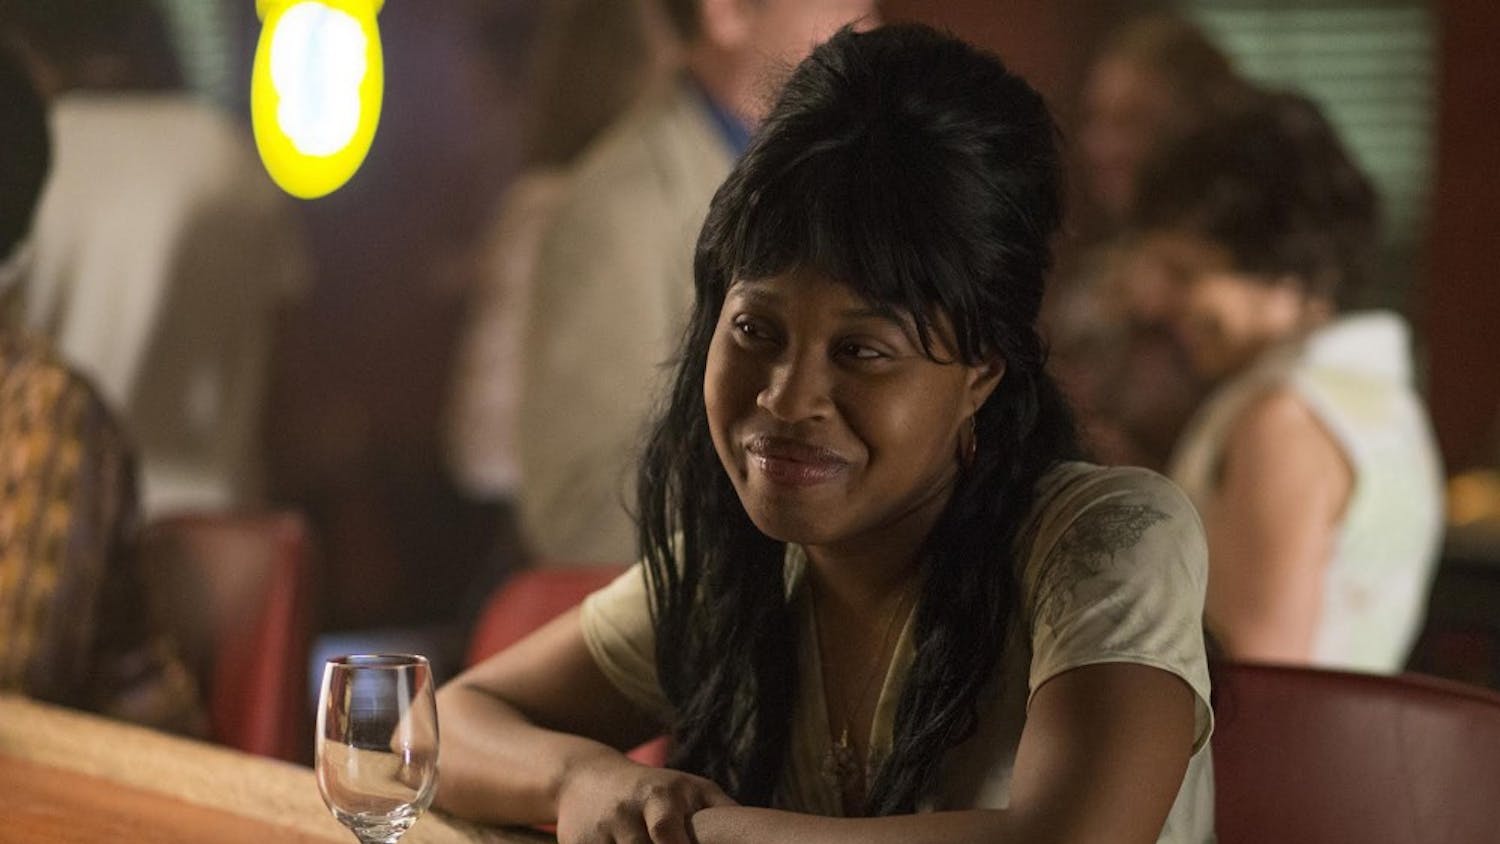 Dominique Fishback stars in the HBO show “The Deuce." Fishback, who is a Pace University graduate, plays a prostitute named Darlene on the show.